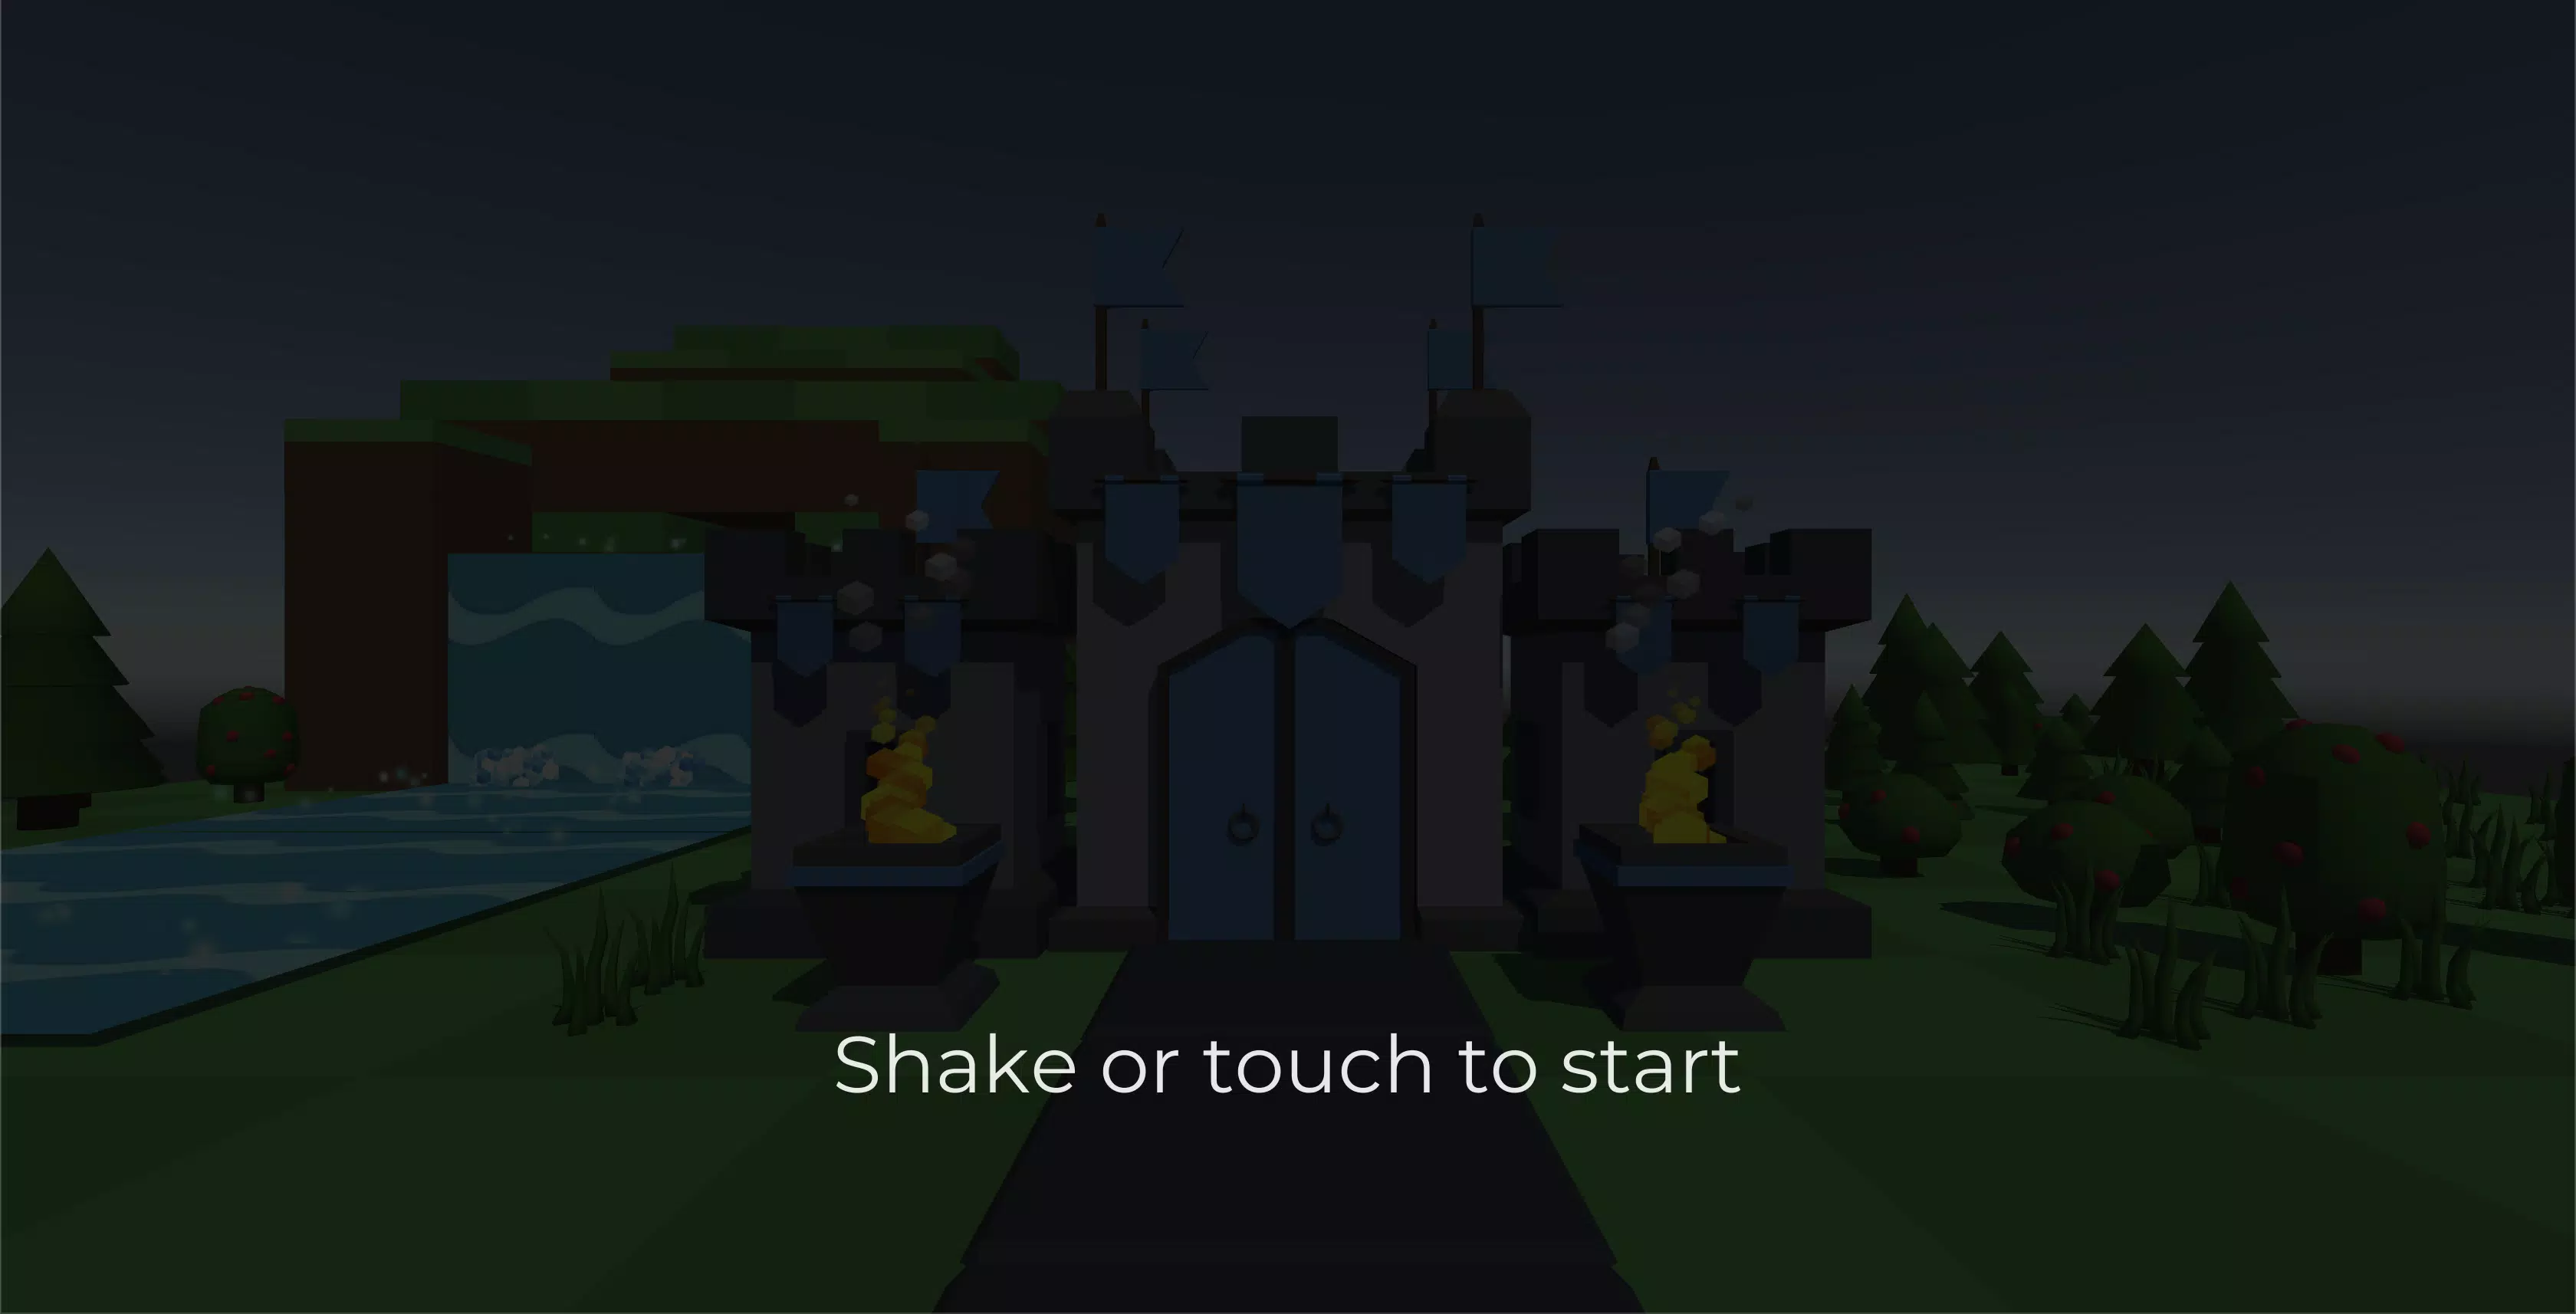 Tower Defence 3D - Play UNBLOCKED Tower Defence 3D on DooDooLove